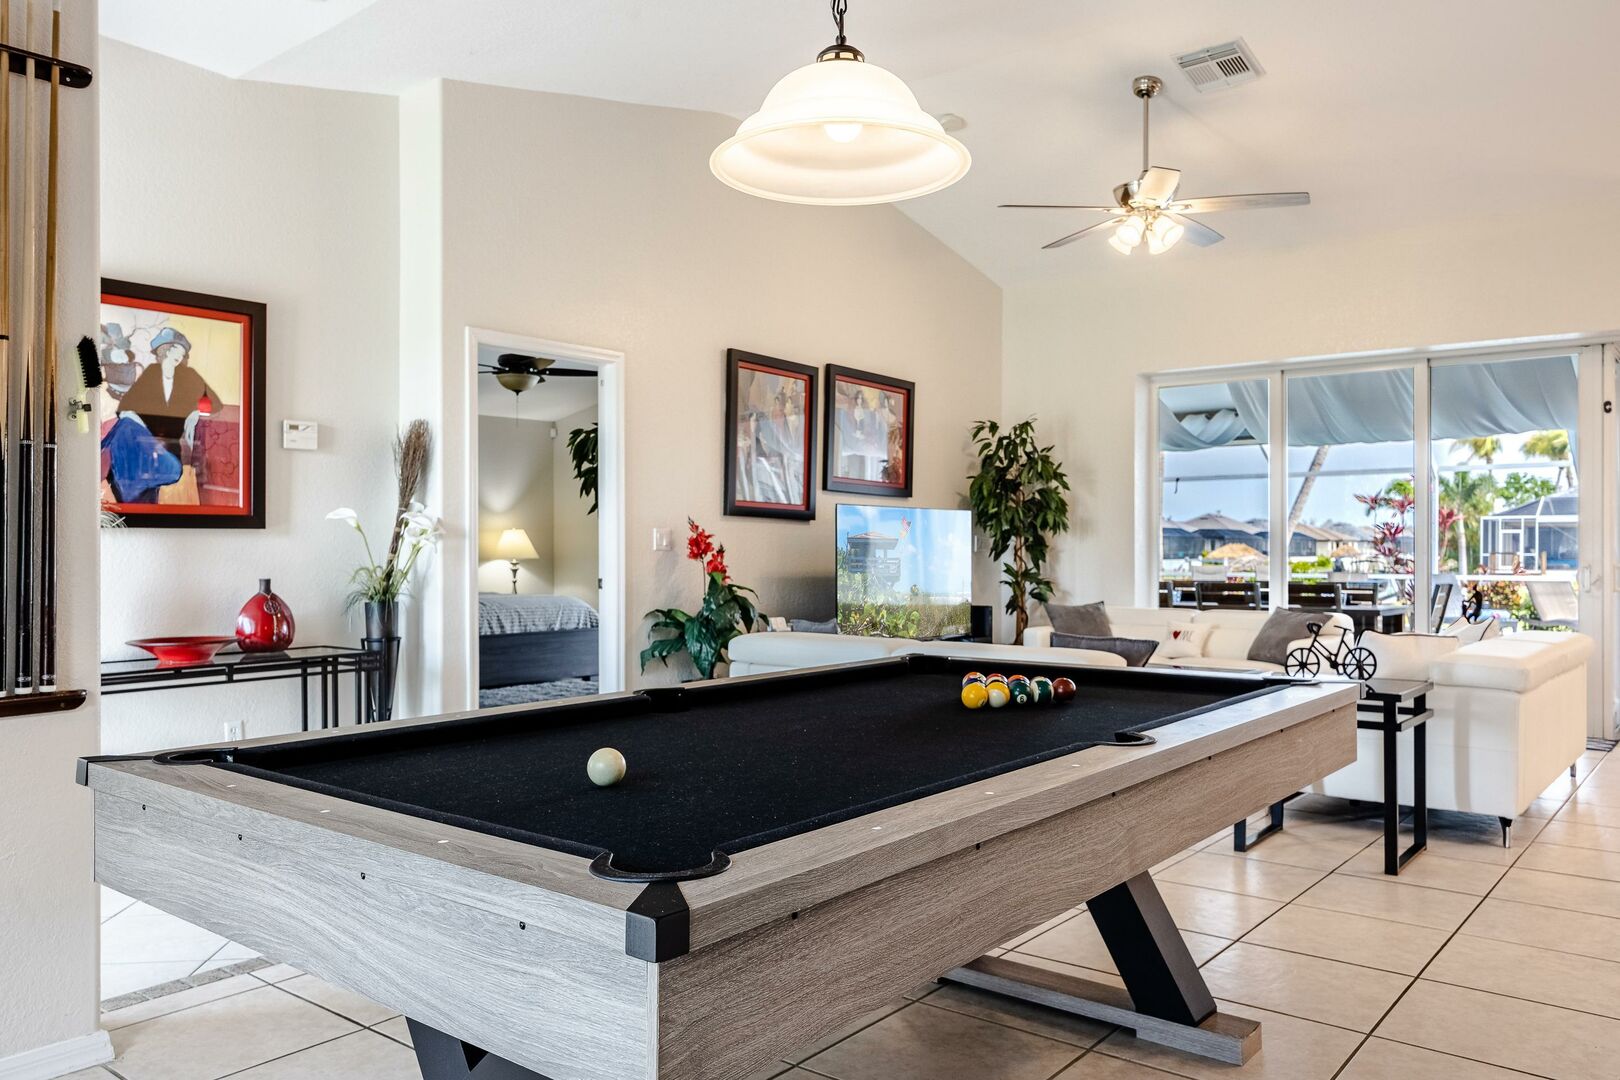 Pool table available at vacation rental